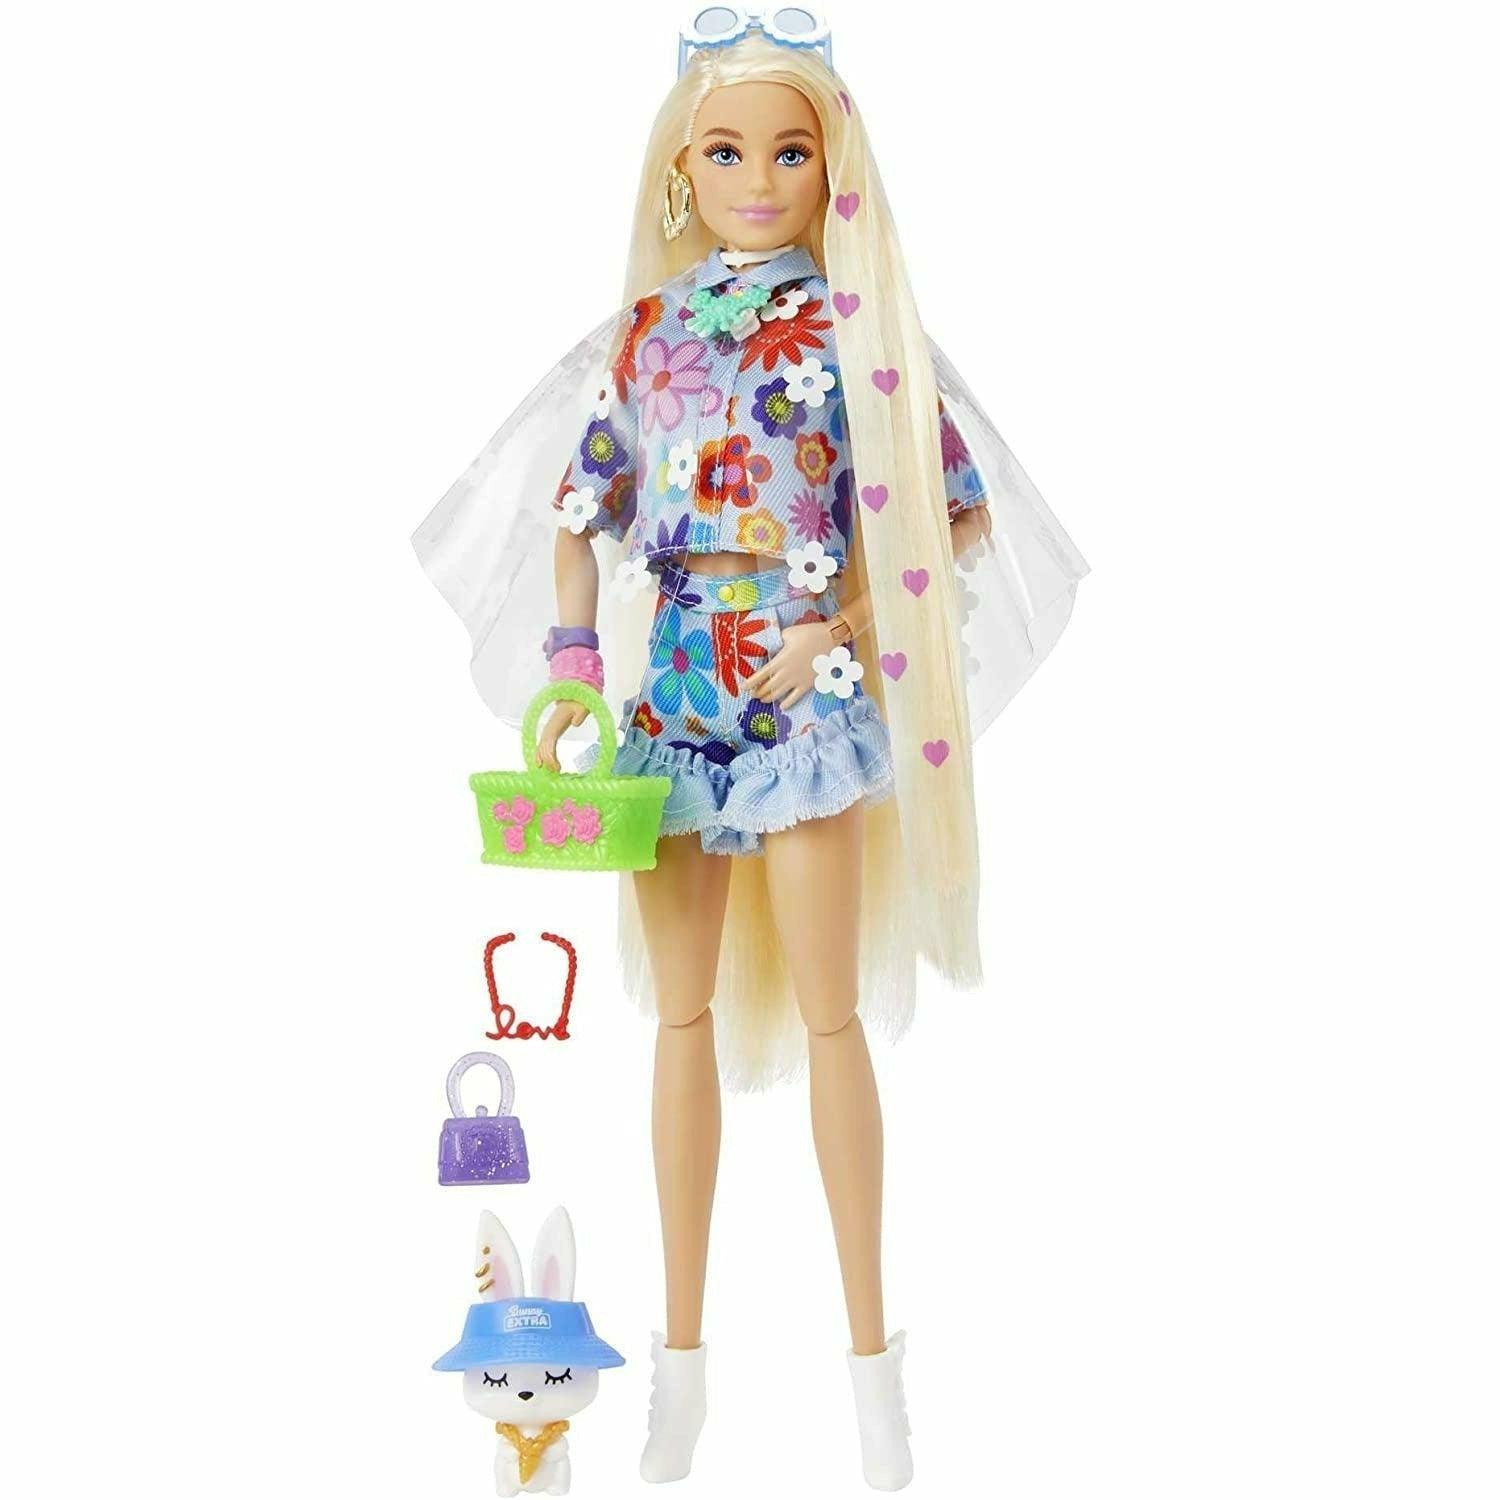 Barbie Extra Doll #12 in Floral 2-Piece Fashion & Accessories, with Pet Bunny, Extra-Long Blonde Hair with Heart Icons & Flexible Joints - BumbleToys - 5-7 Years, Barbie, Dolls, Fashion Dolls & Accessories, Girls, Miniature Dolls & Accessories, OXE, Pre-Order